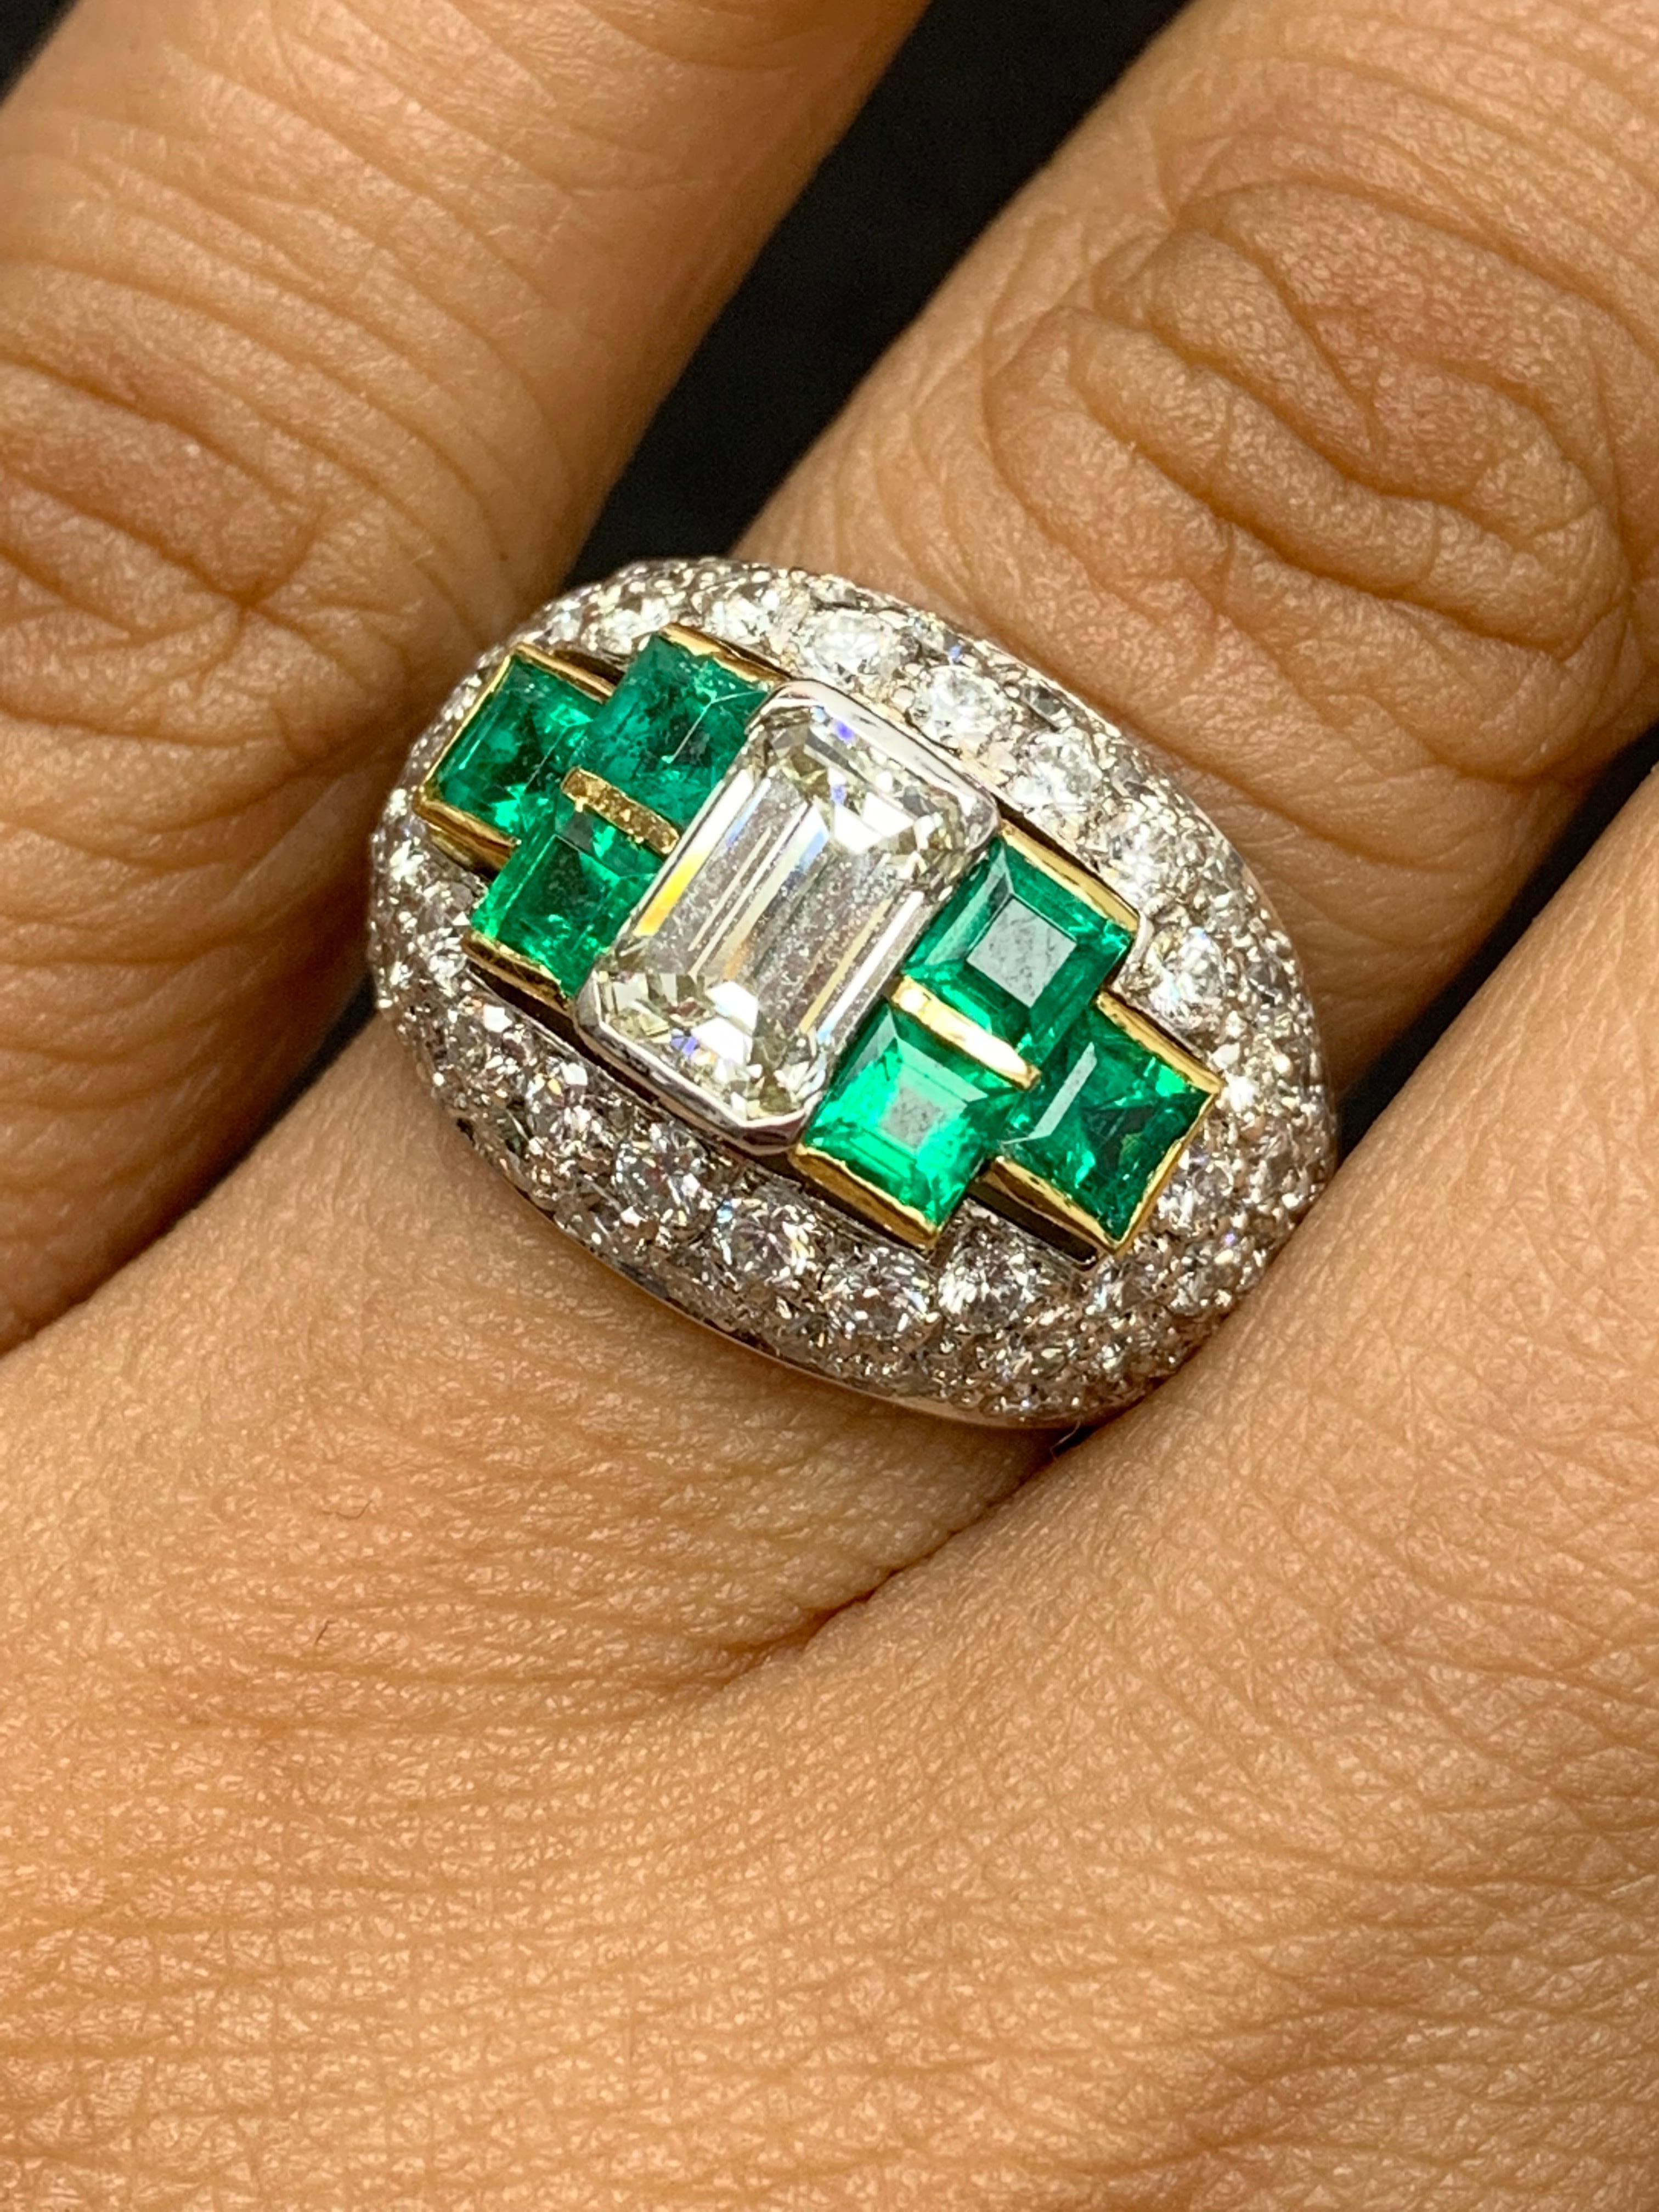 Exquisite Fancy Wide Dome Cocktail Ring adorned by Brilliant princess cut emeralds along with Round Cut Diamonds expertly placed throughout the Dome shape band.  Emerald cut Center Diamond weighs 1.17 carats. 68 diamonds weigh 2.01 carats and 1.12